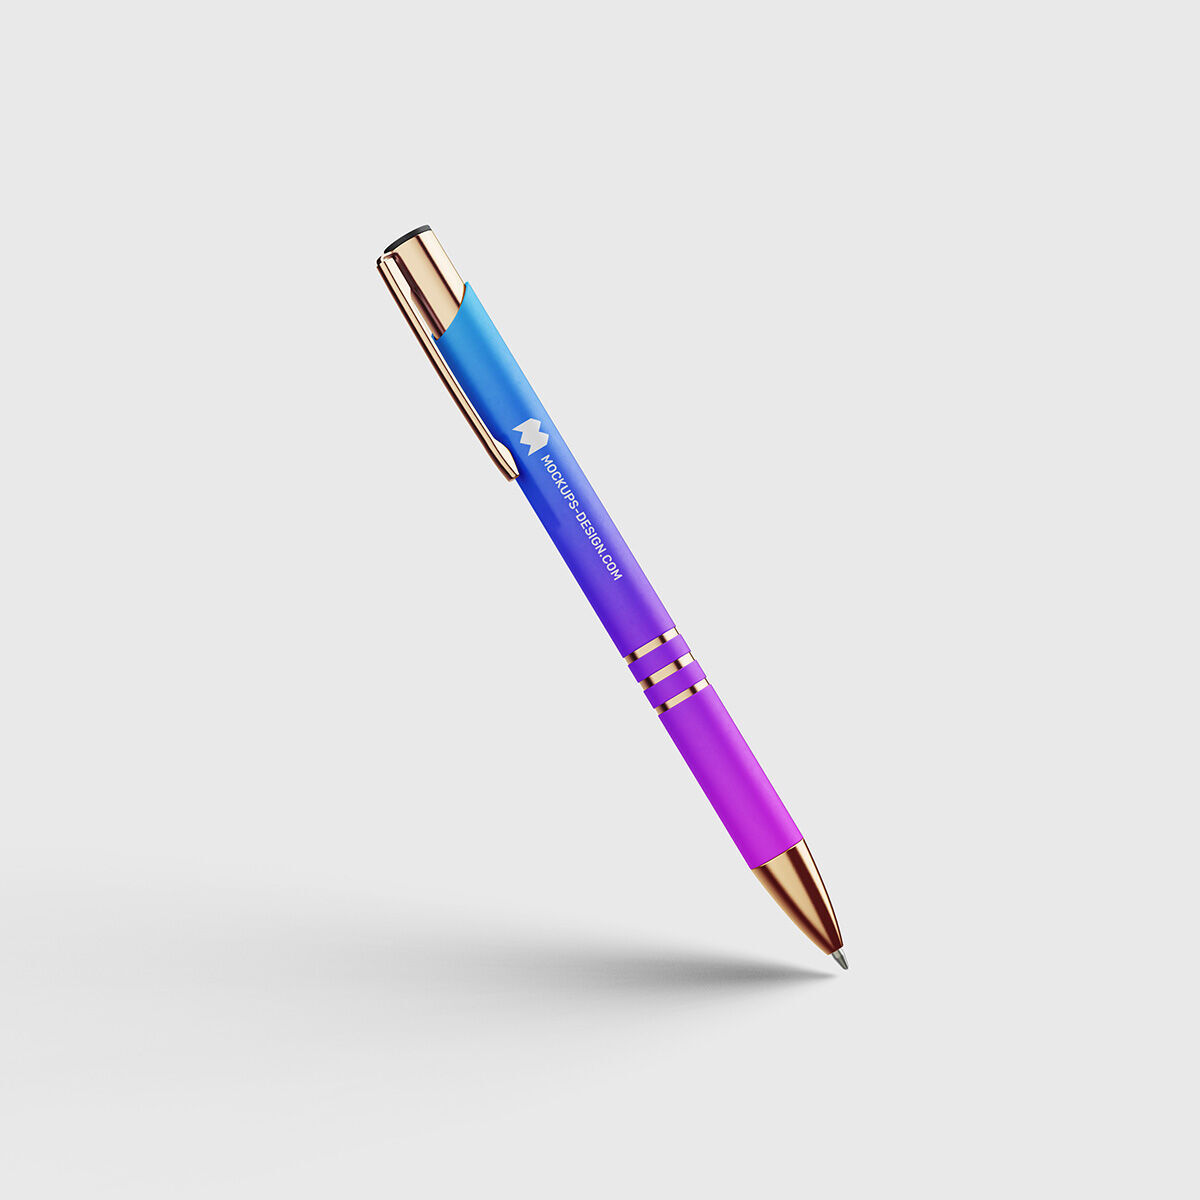 2 Colorful Pen Mockup Next To Each Other FREE PSD